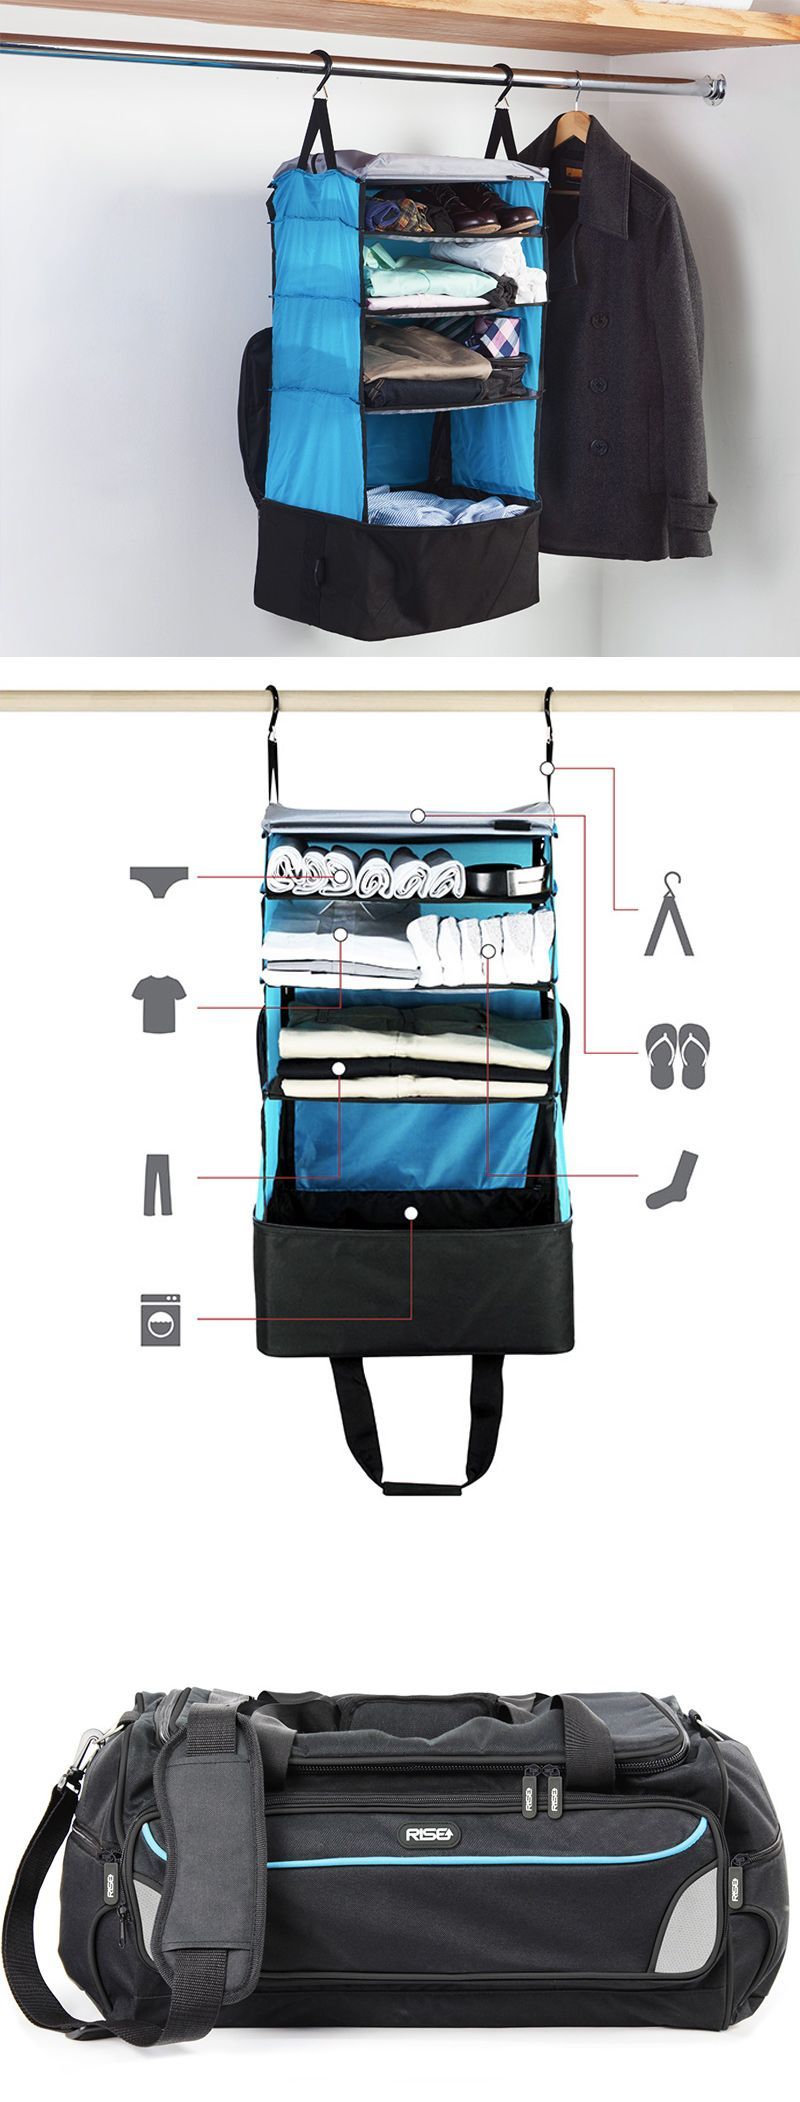 Rise Gear makes bags and suitcases that are like a portable closet.